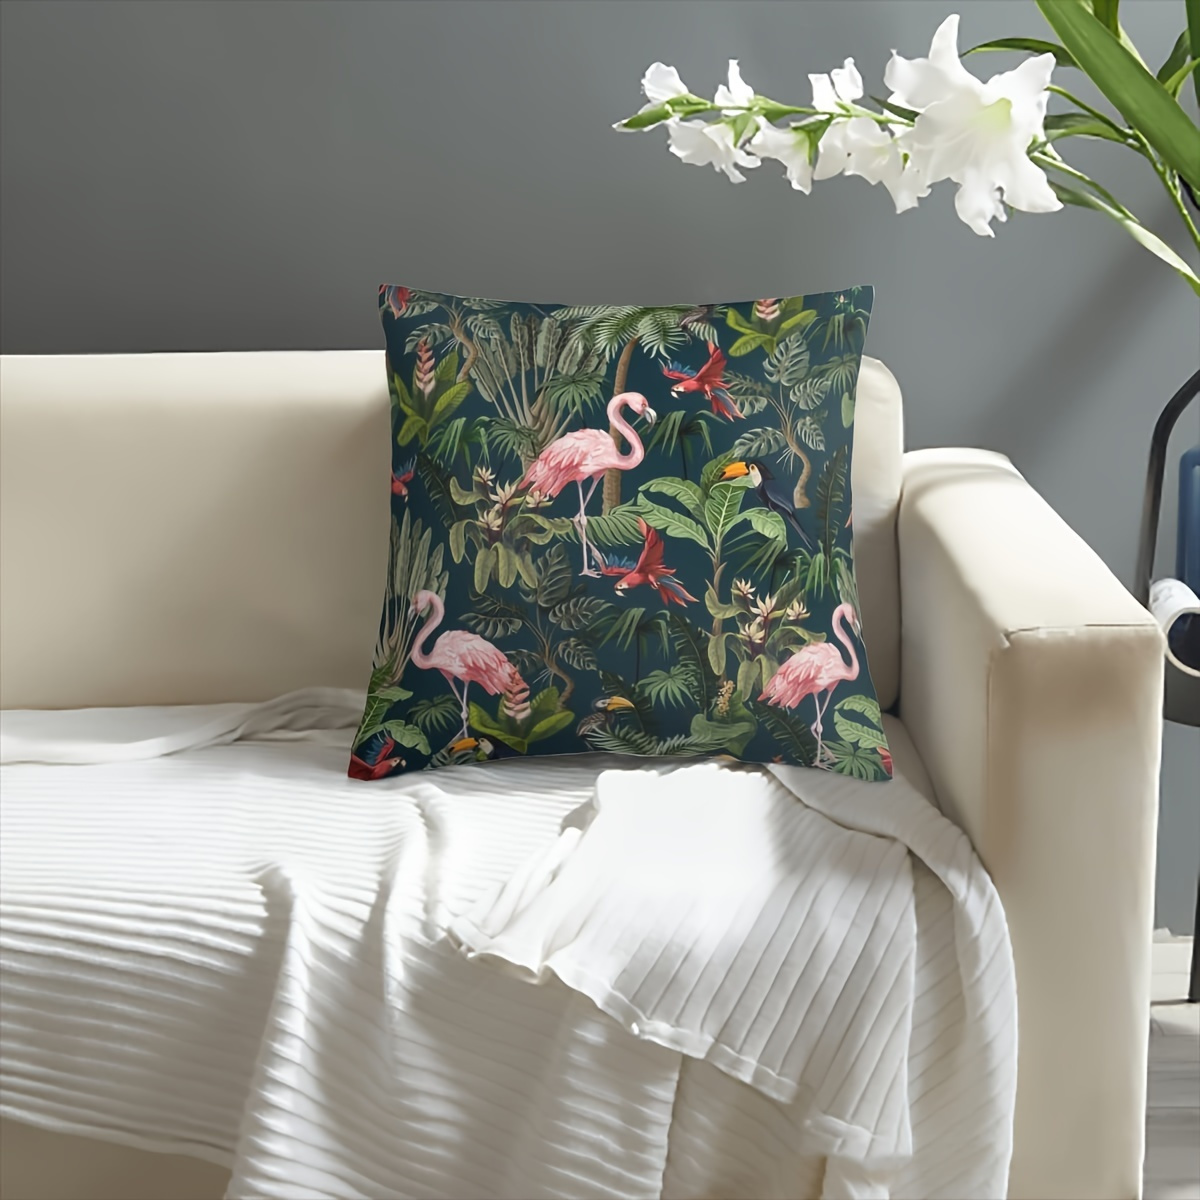 

1pc Designed Green Jungle Pattern With Toucan Flamingo Parrot, Soft Throw Pillow Cover Decorative Sofa Pillow Cases Fine-made Square Cushion Cover For Couch Bedroom Living Room Home Decor (18×18inch)